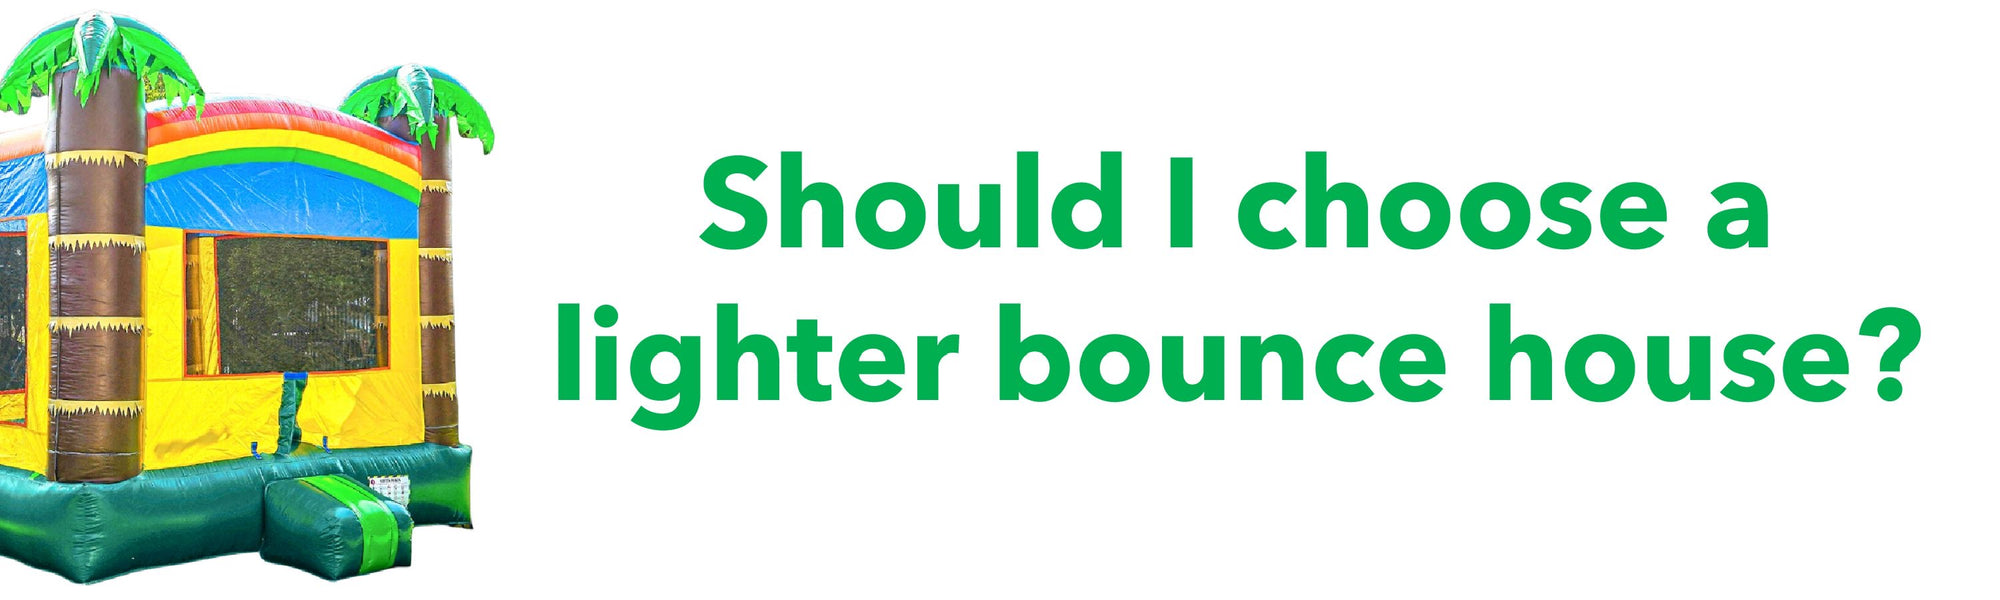 Why should I choose a lighter bounce house?